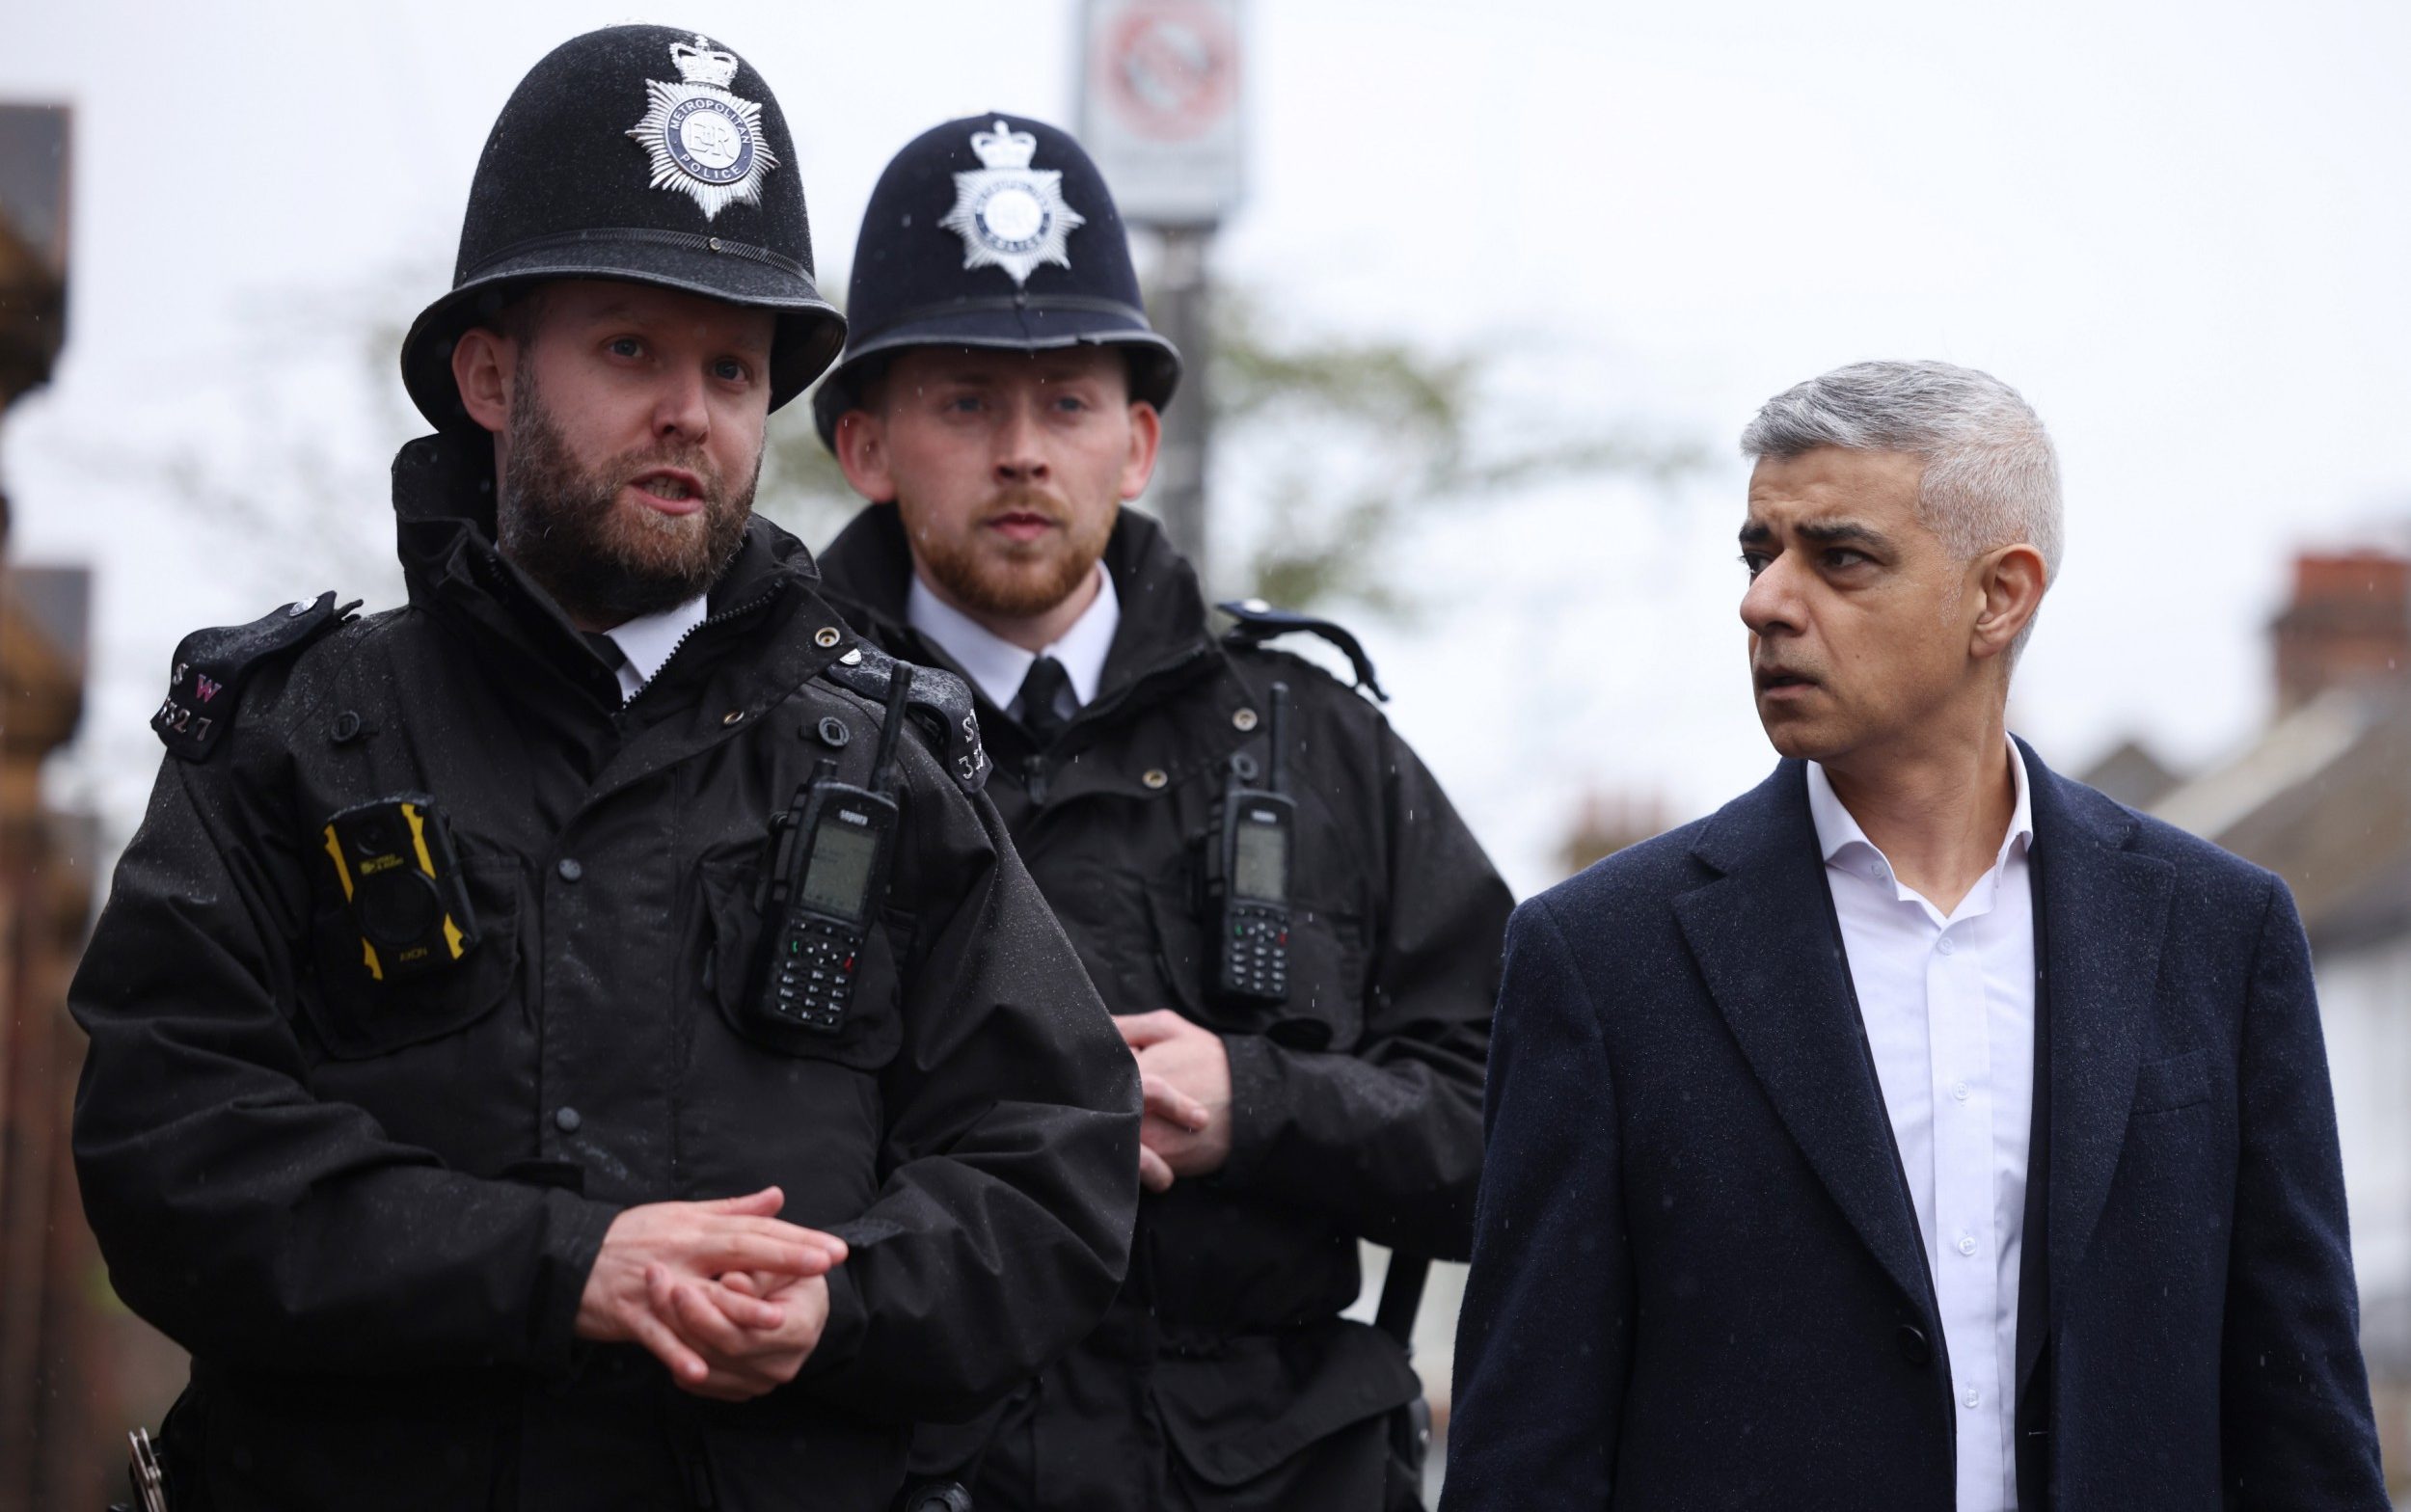 sadiq khan to spend up to £25,000 on ‘anti-racism allyship’ for policing board